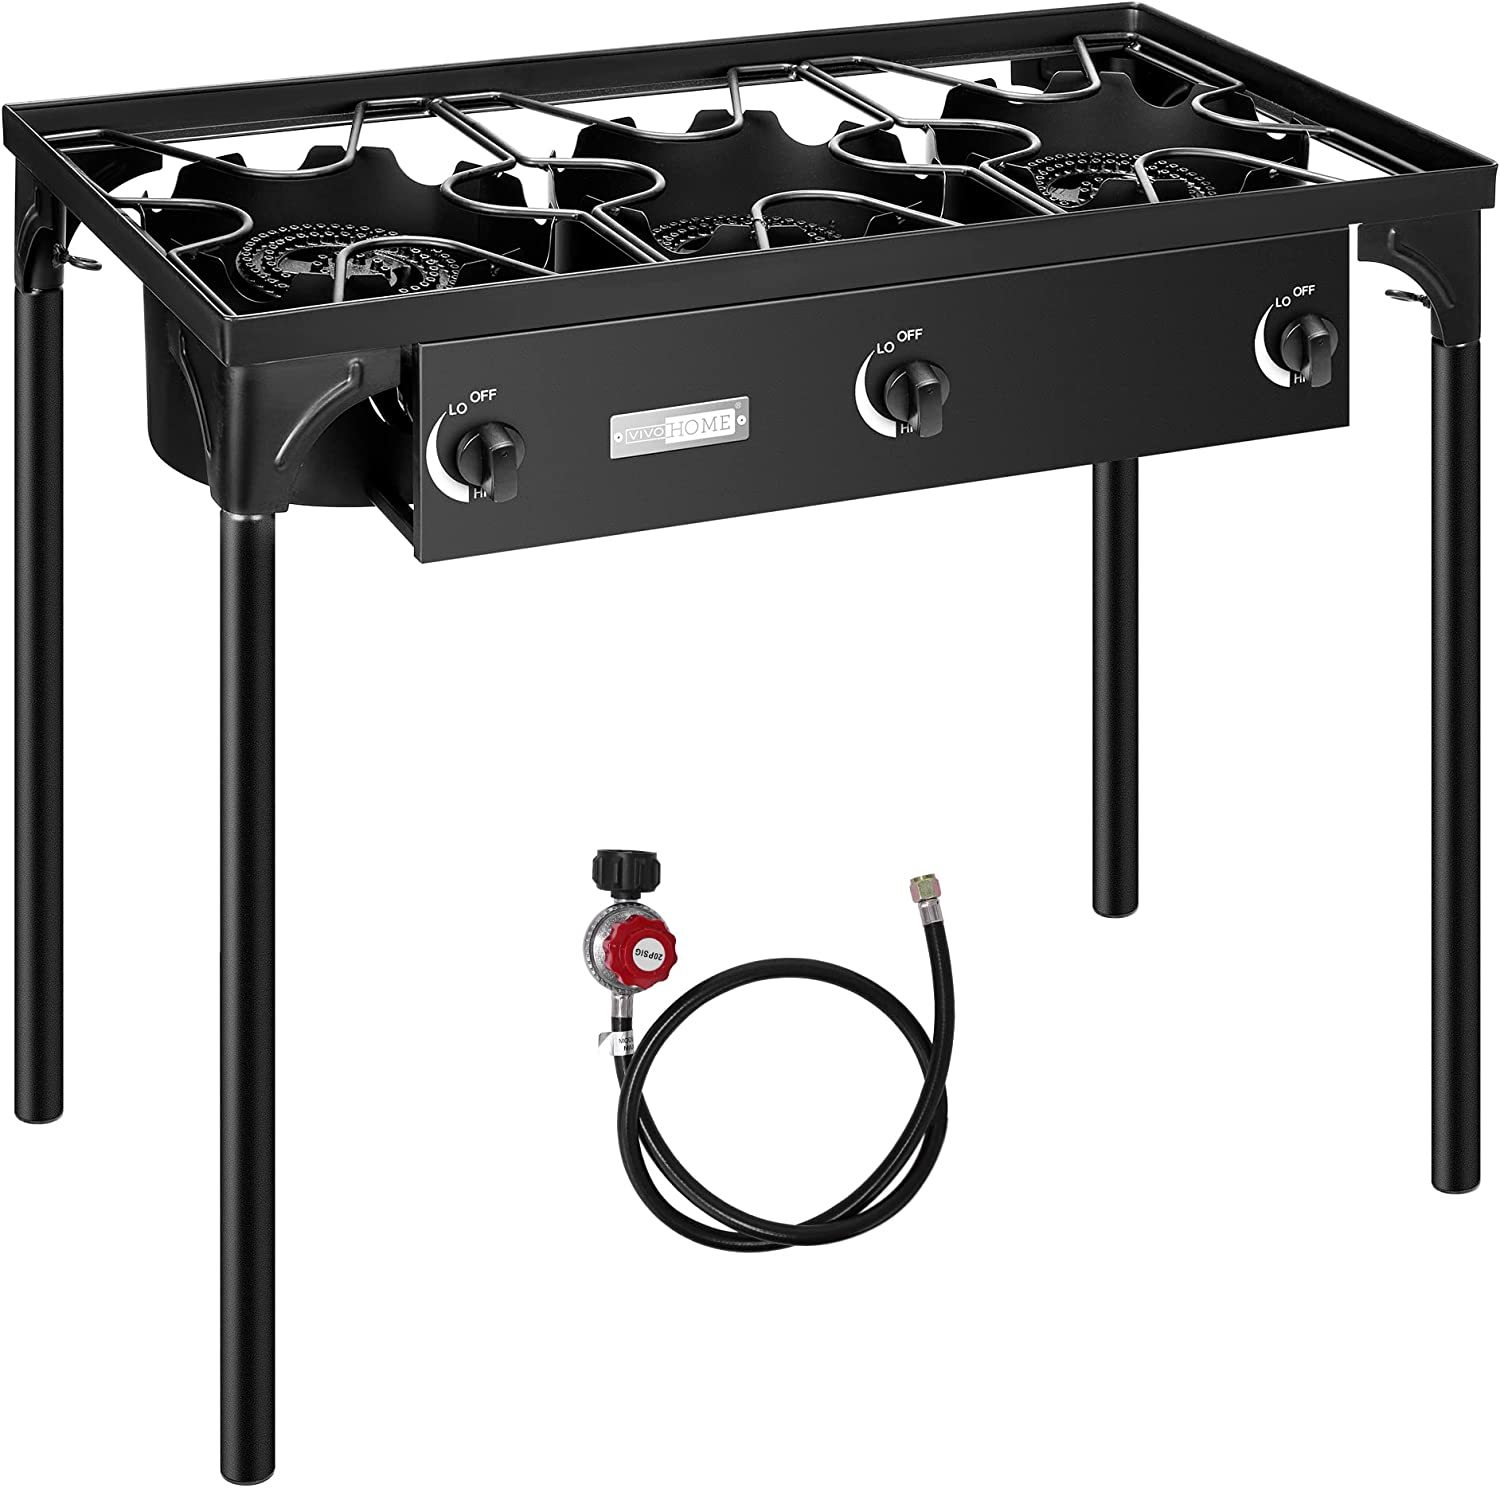 Vivicreate 15000 BTU Camping Camp Range Chef Griddle Outdoor